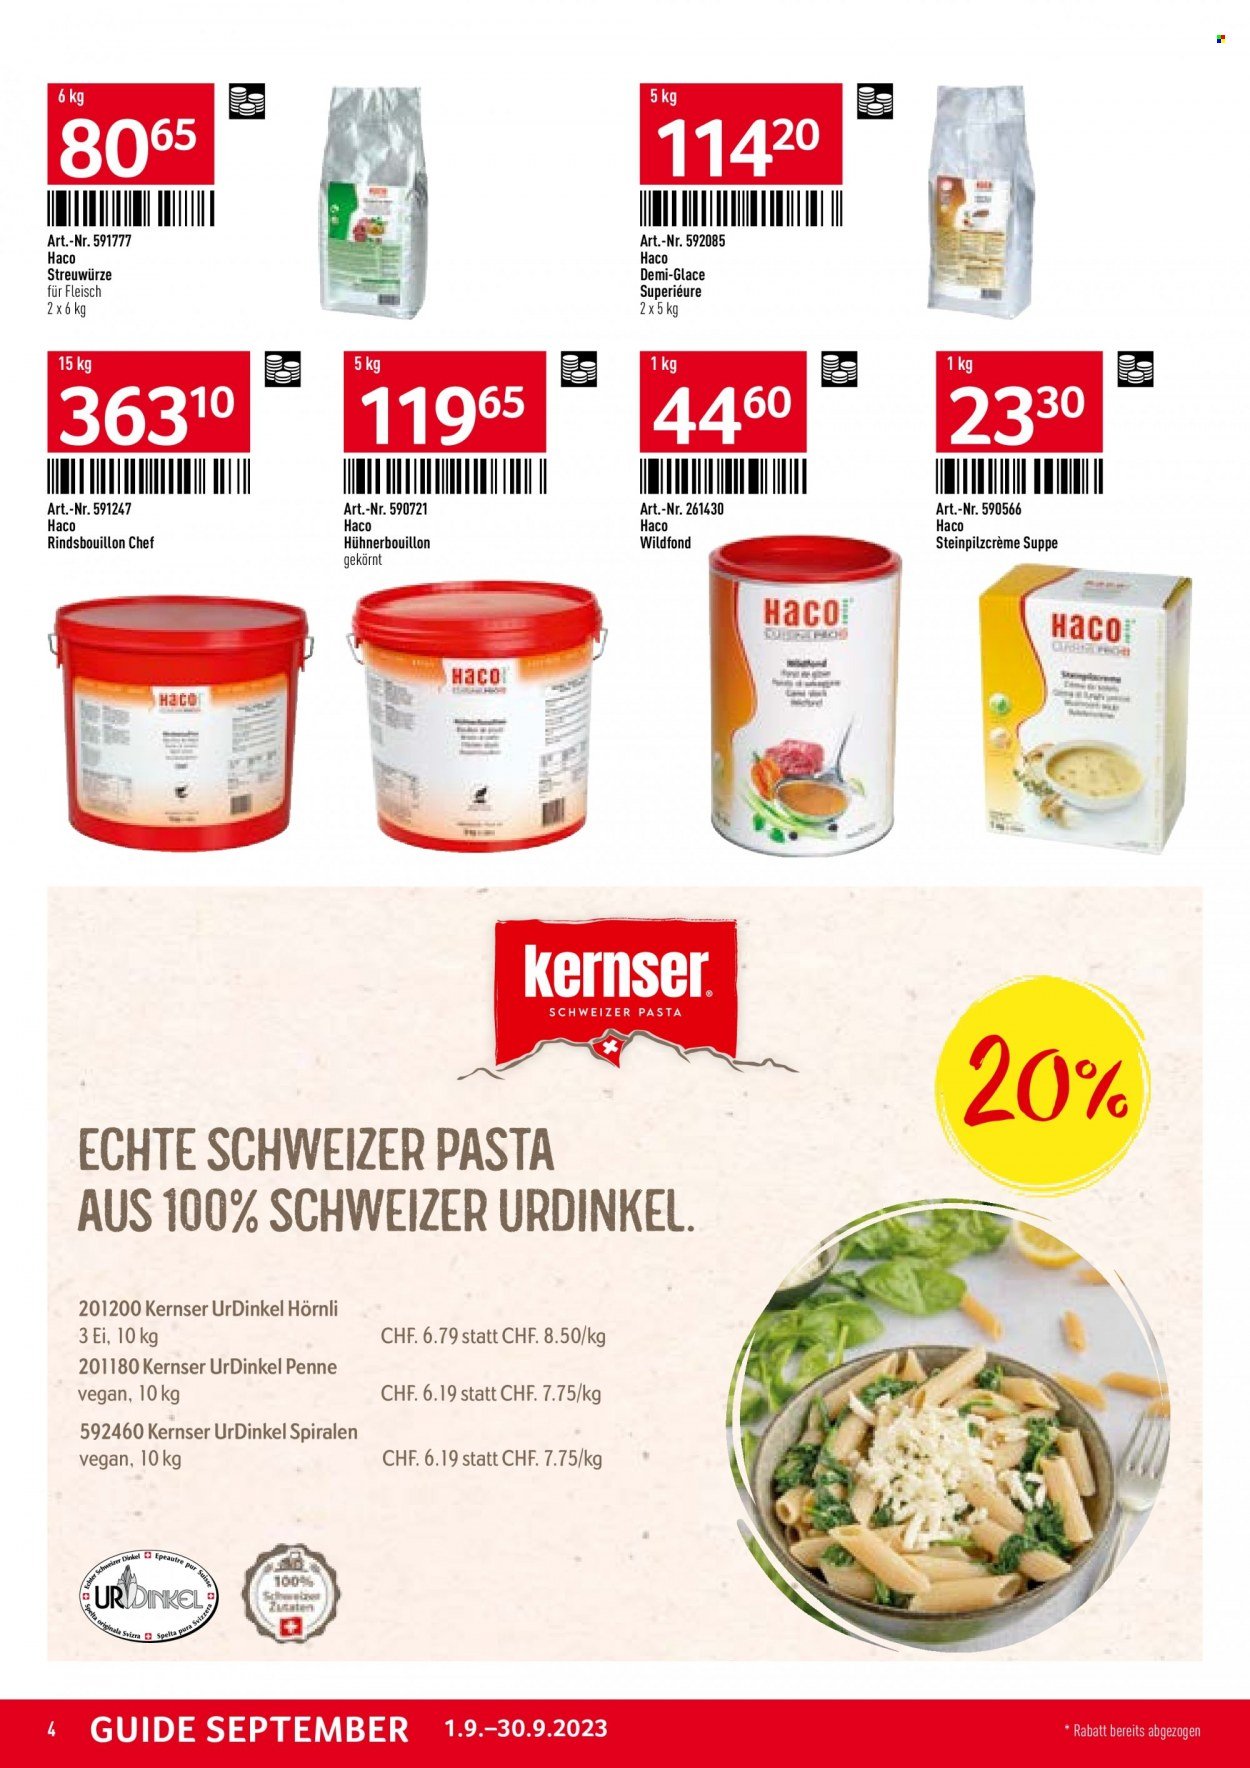 Catalogue TransGourmet - 1.9.2023 - 30.9.2023. Page 4.